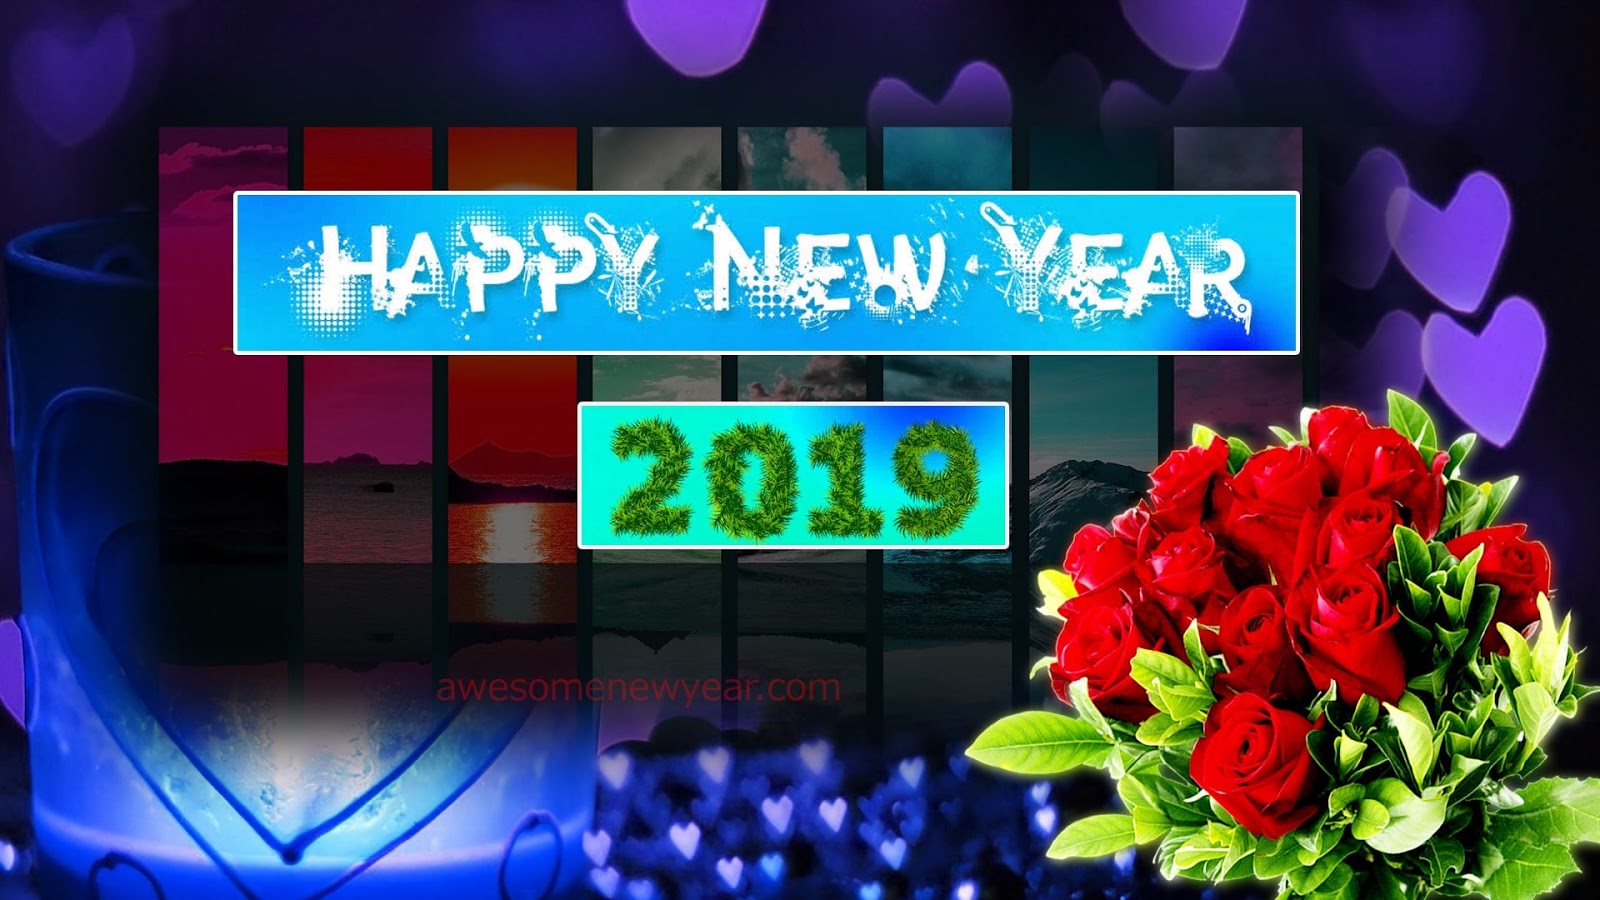  New Year 2019 Images